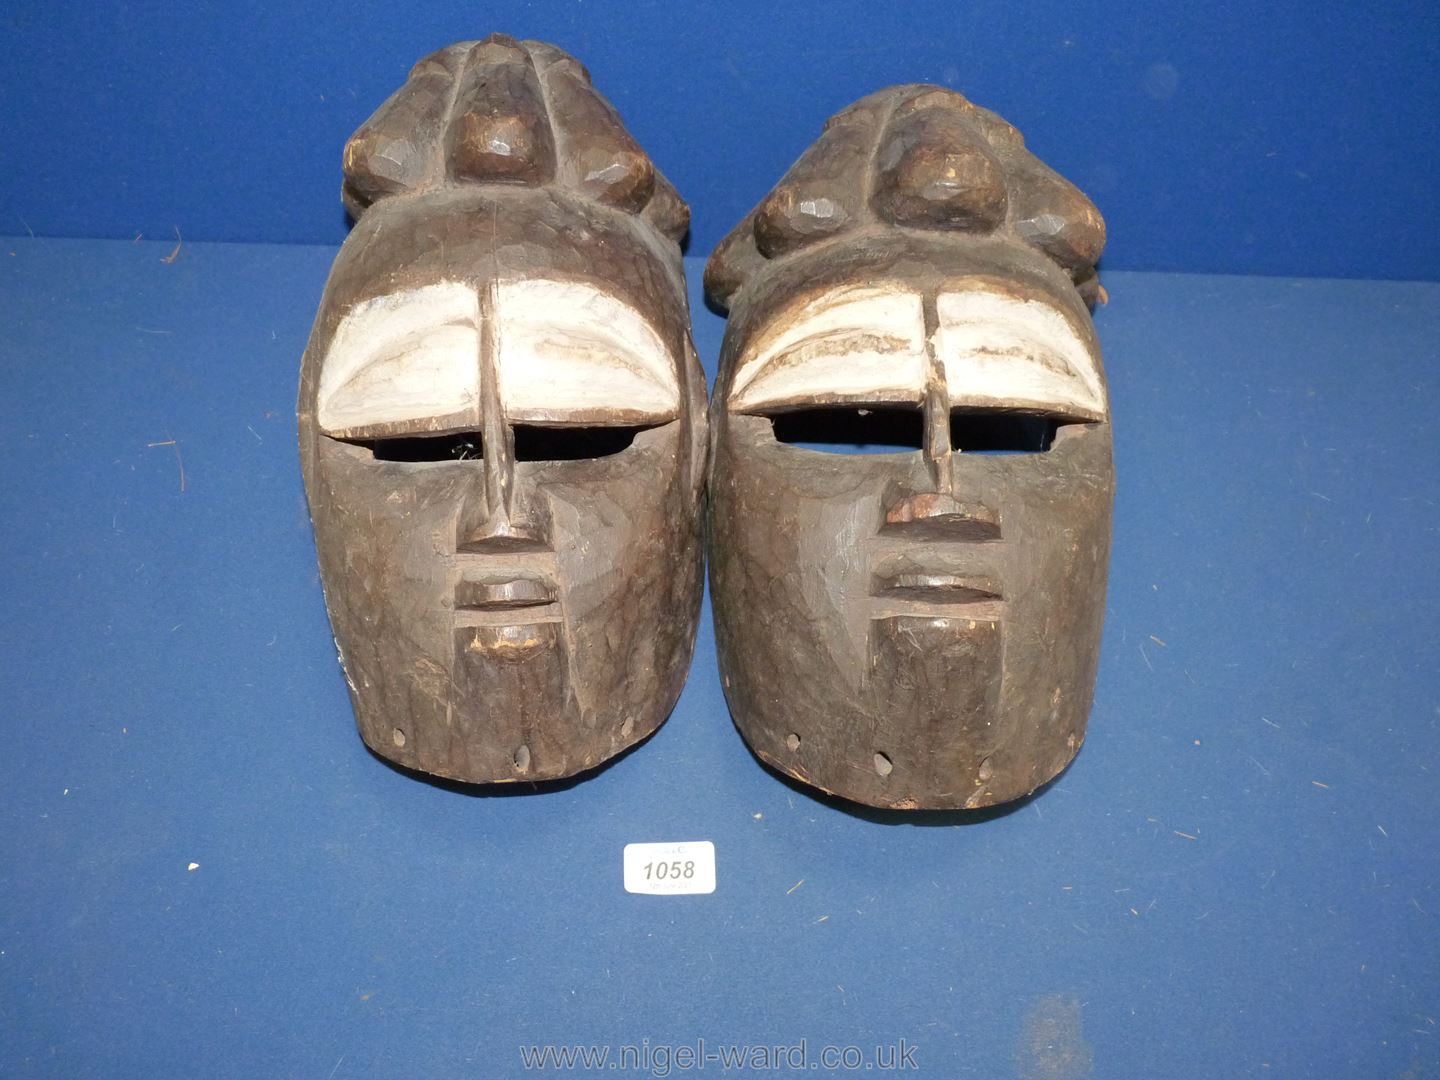 Two hand carved African face masks with white painted eyes, lightweight, possibly cork, 12" tall.